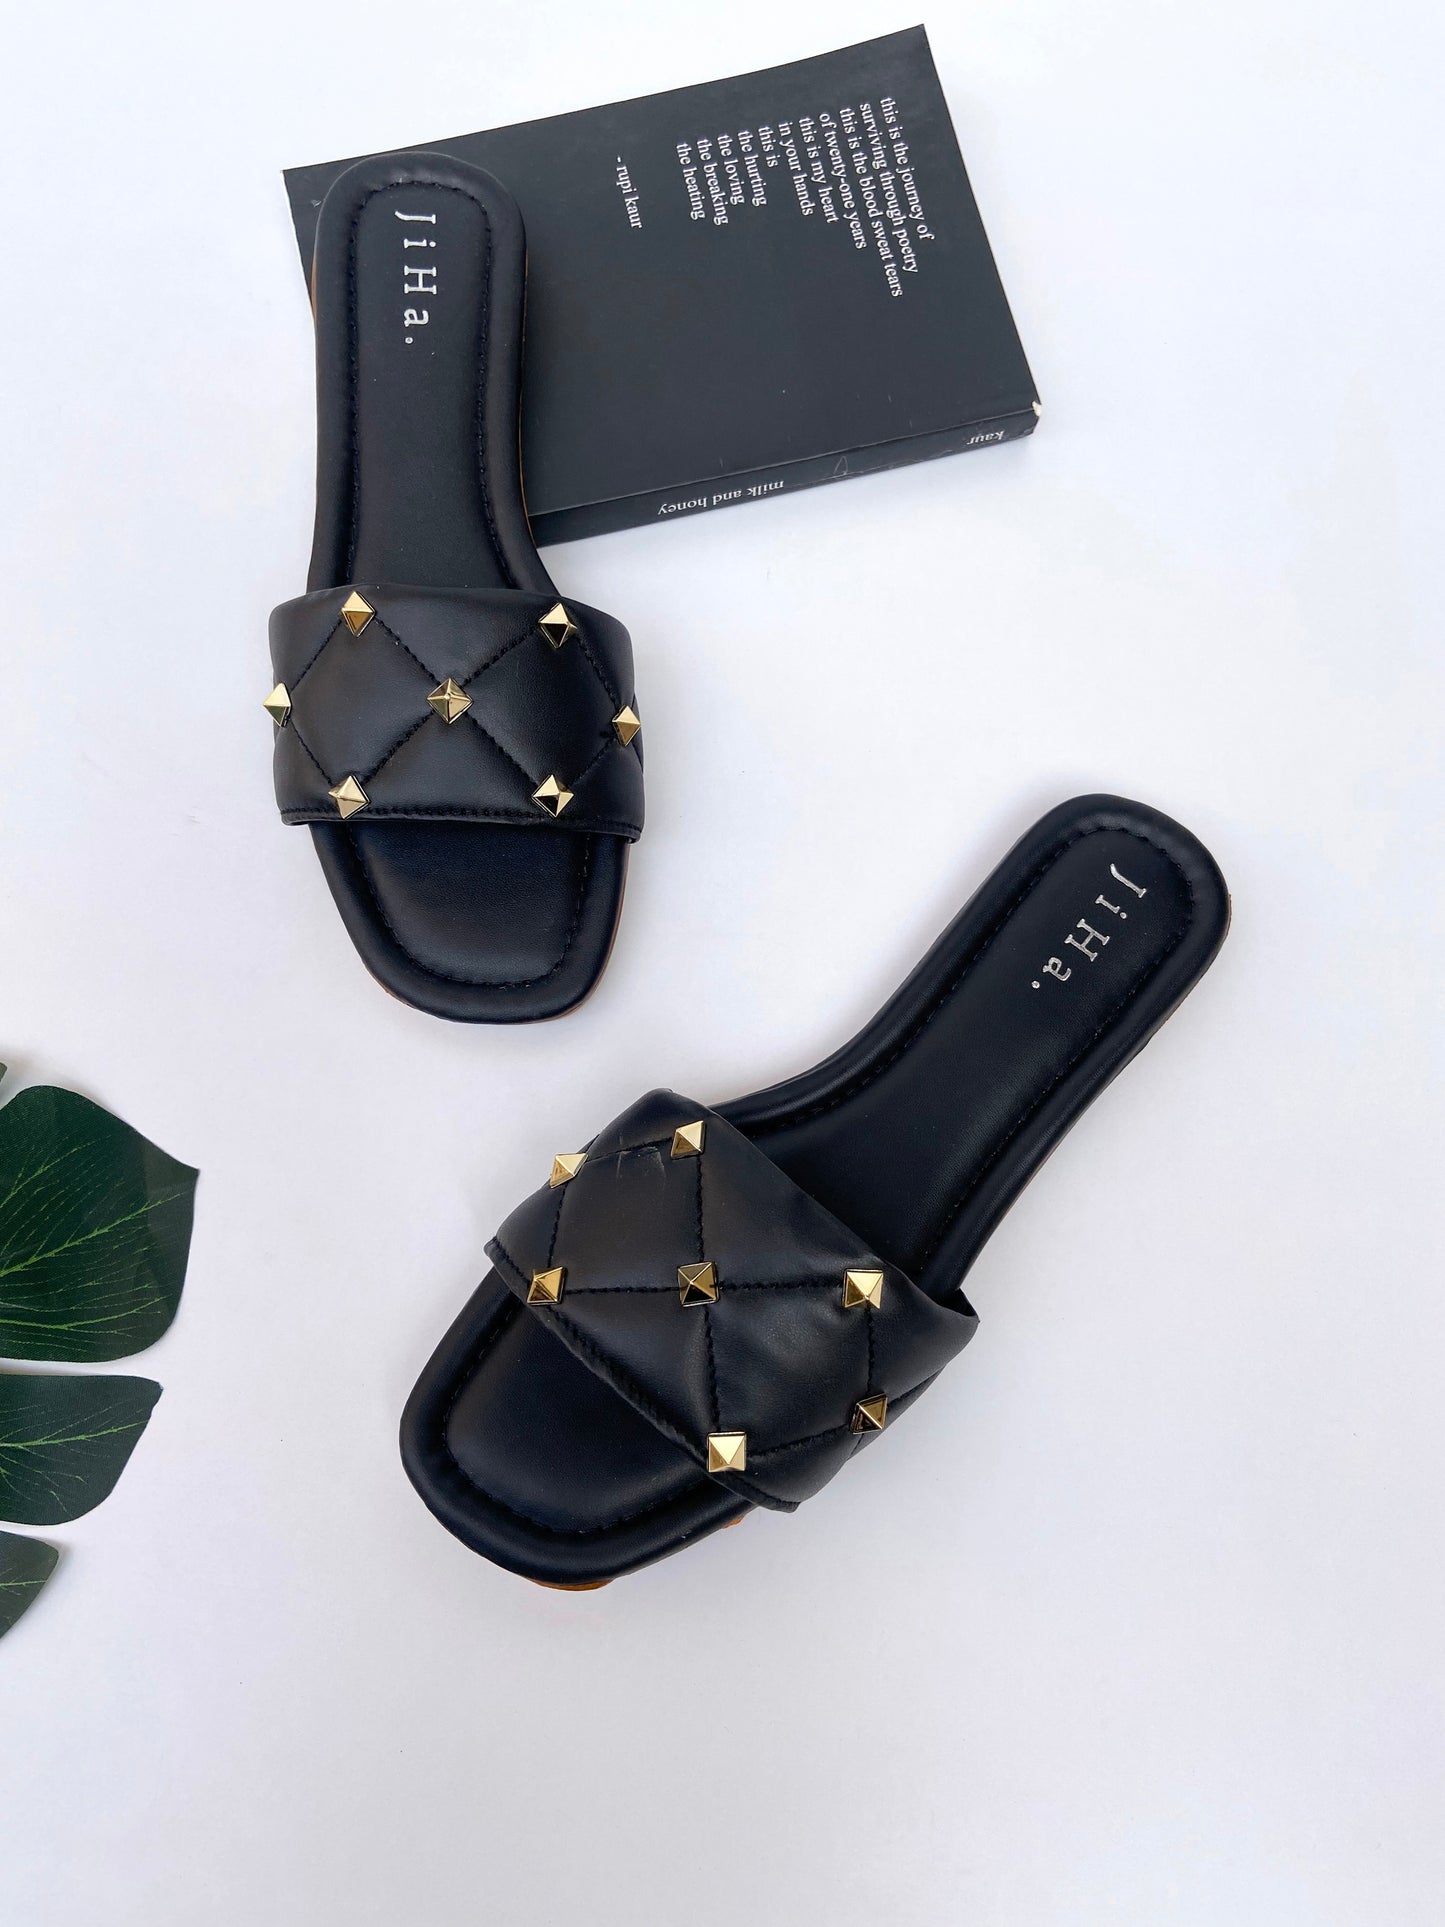 Black Quilted Stone Strap Flats Sandals